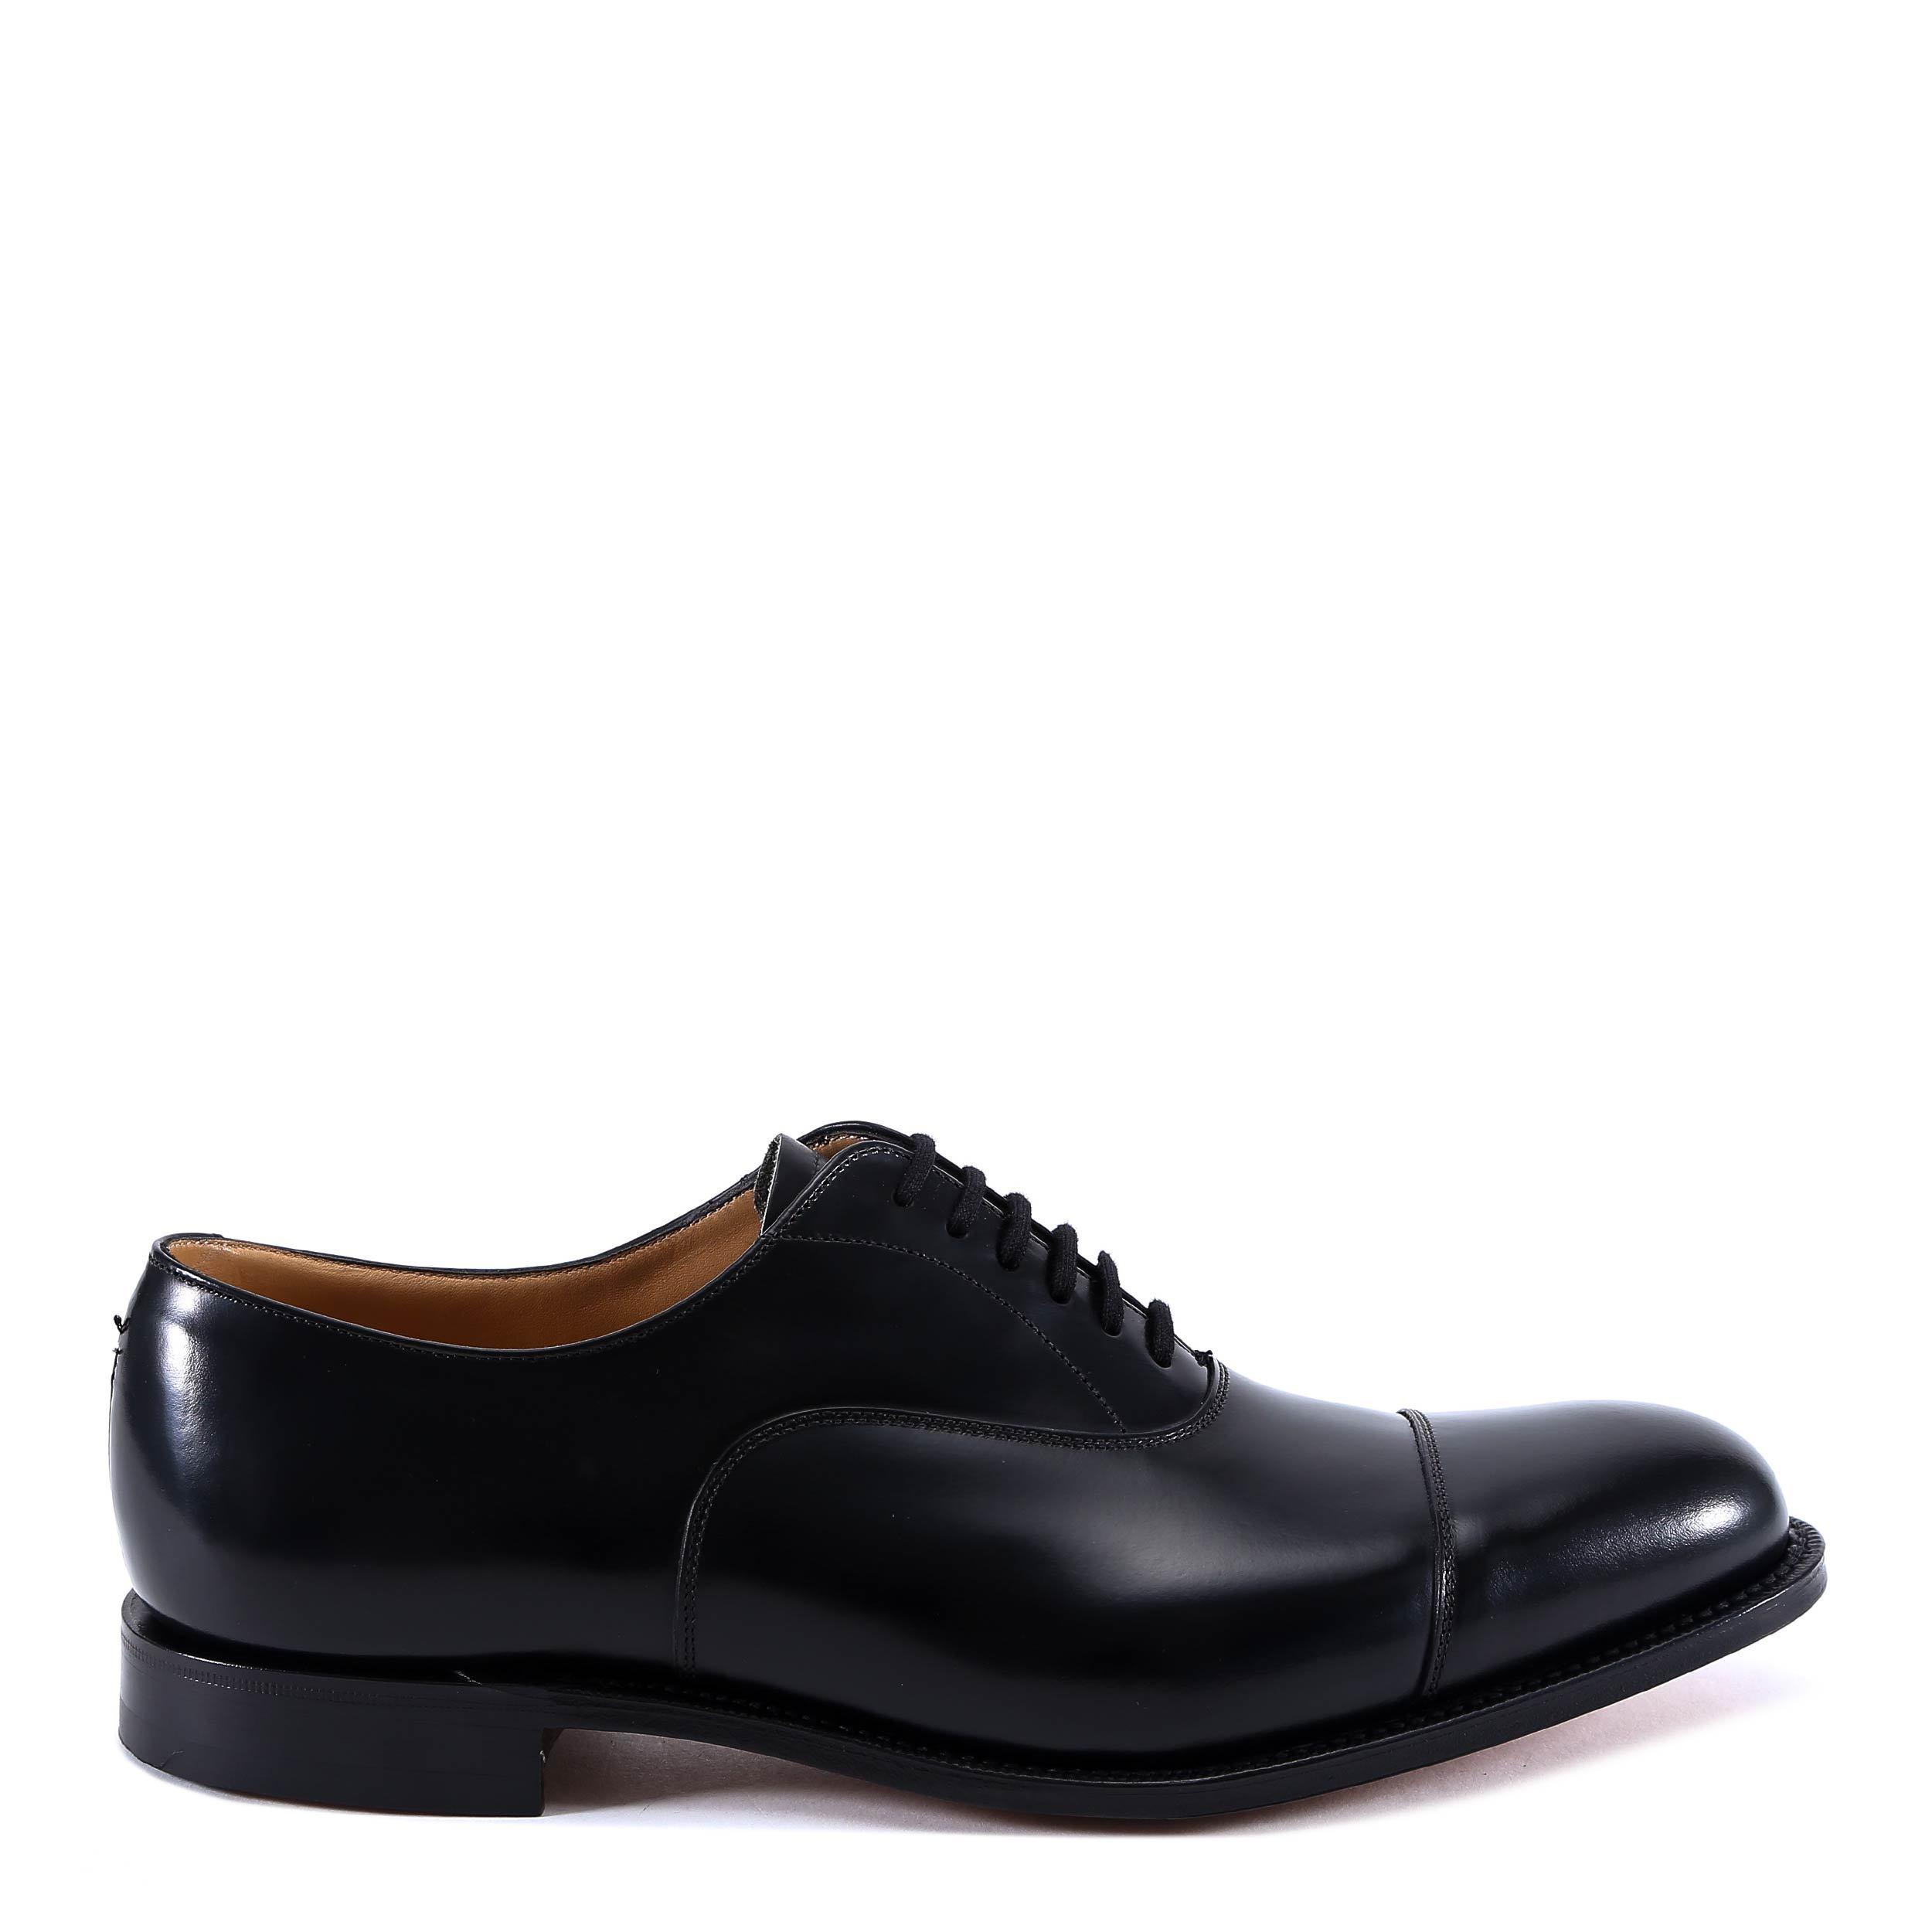 Church's Leather Oxford Shoes in Black for Men - Lyst